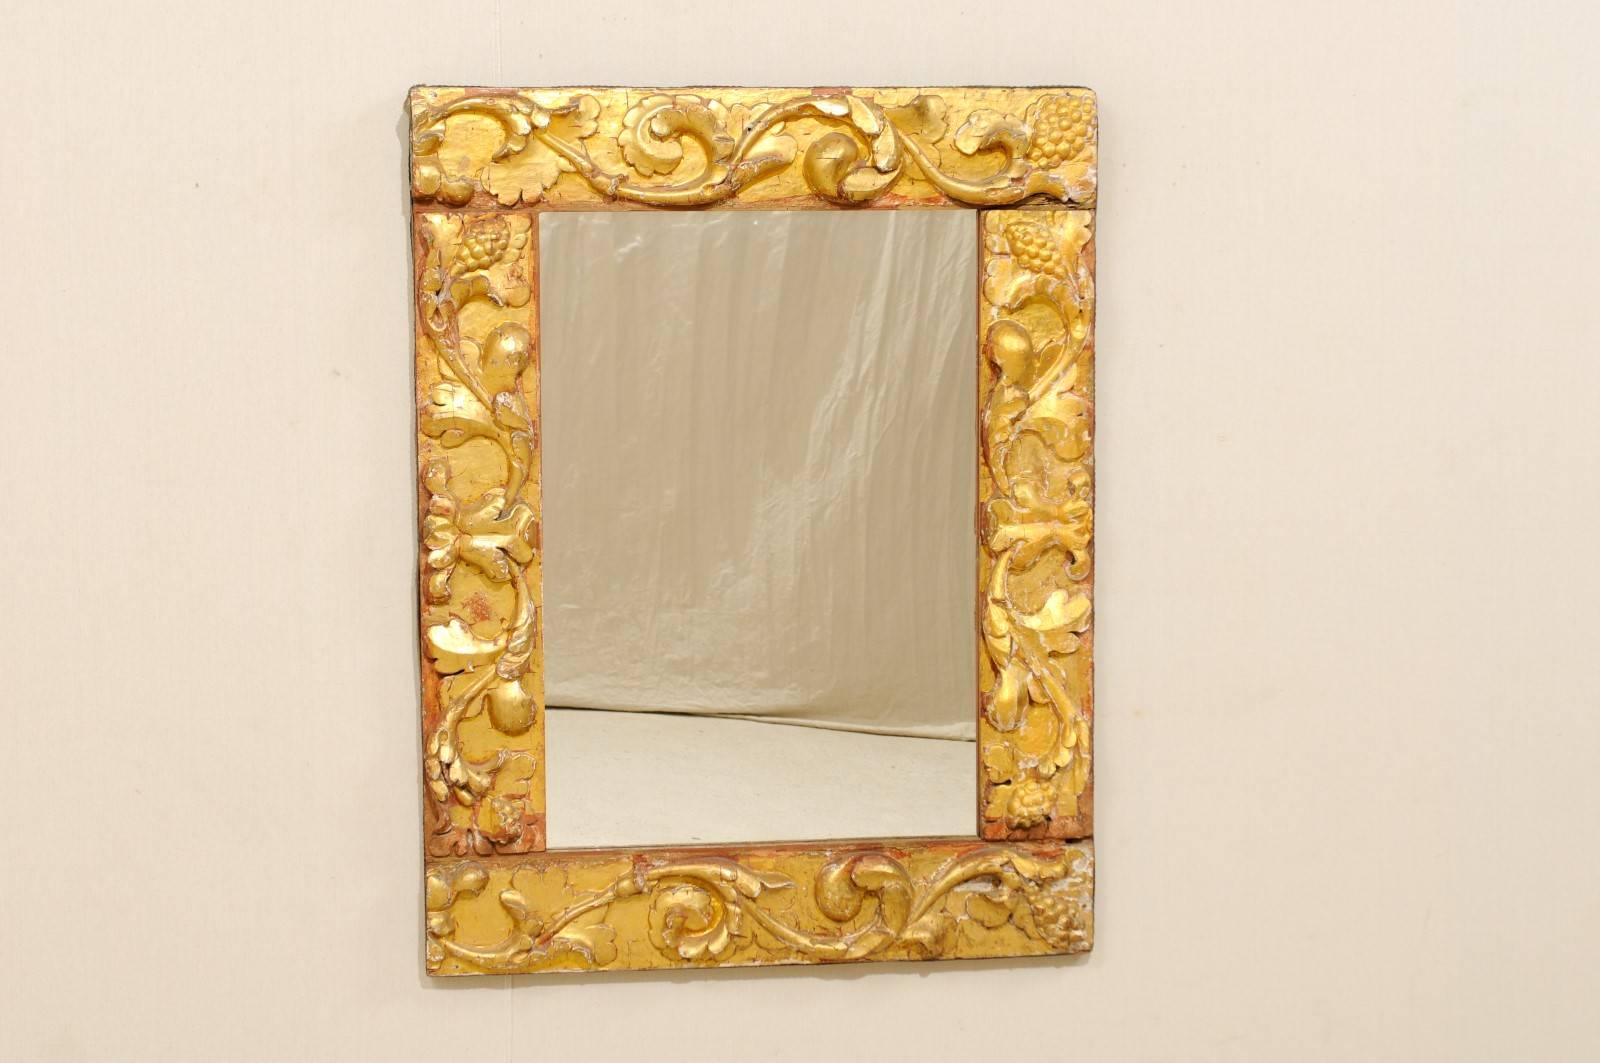 An Italian giltwood carved mirror made of 19th century fragments. This gilded rectangular Italian mirror is made of richly carved leafy scrolls decorating the frame. The surround is gesso over gilded wood, gold with spots of reddish ochre, nice age